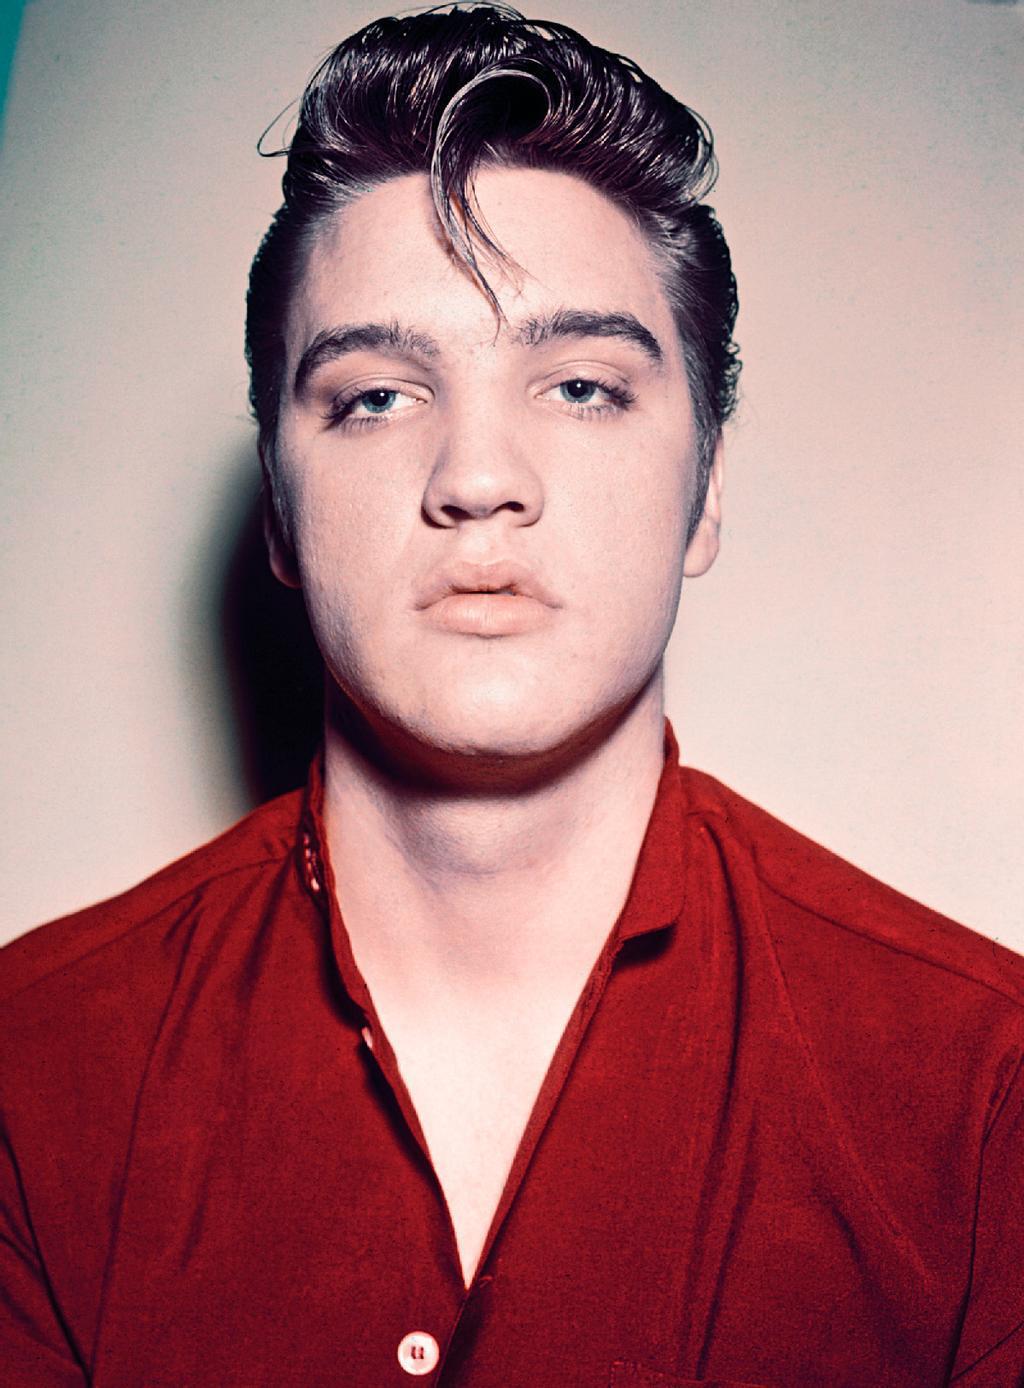 “Before Elvis there was no fashion”